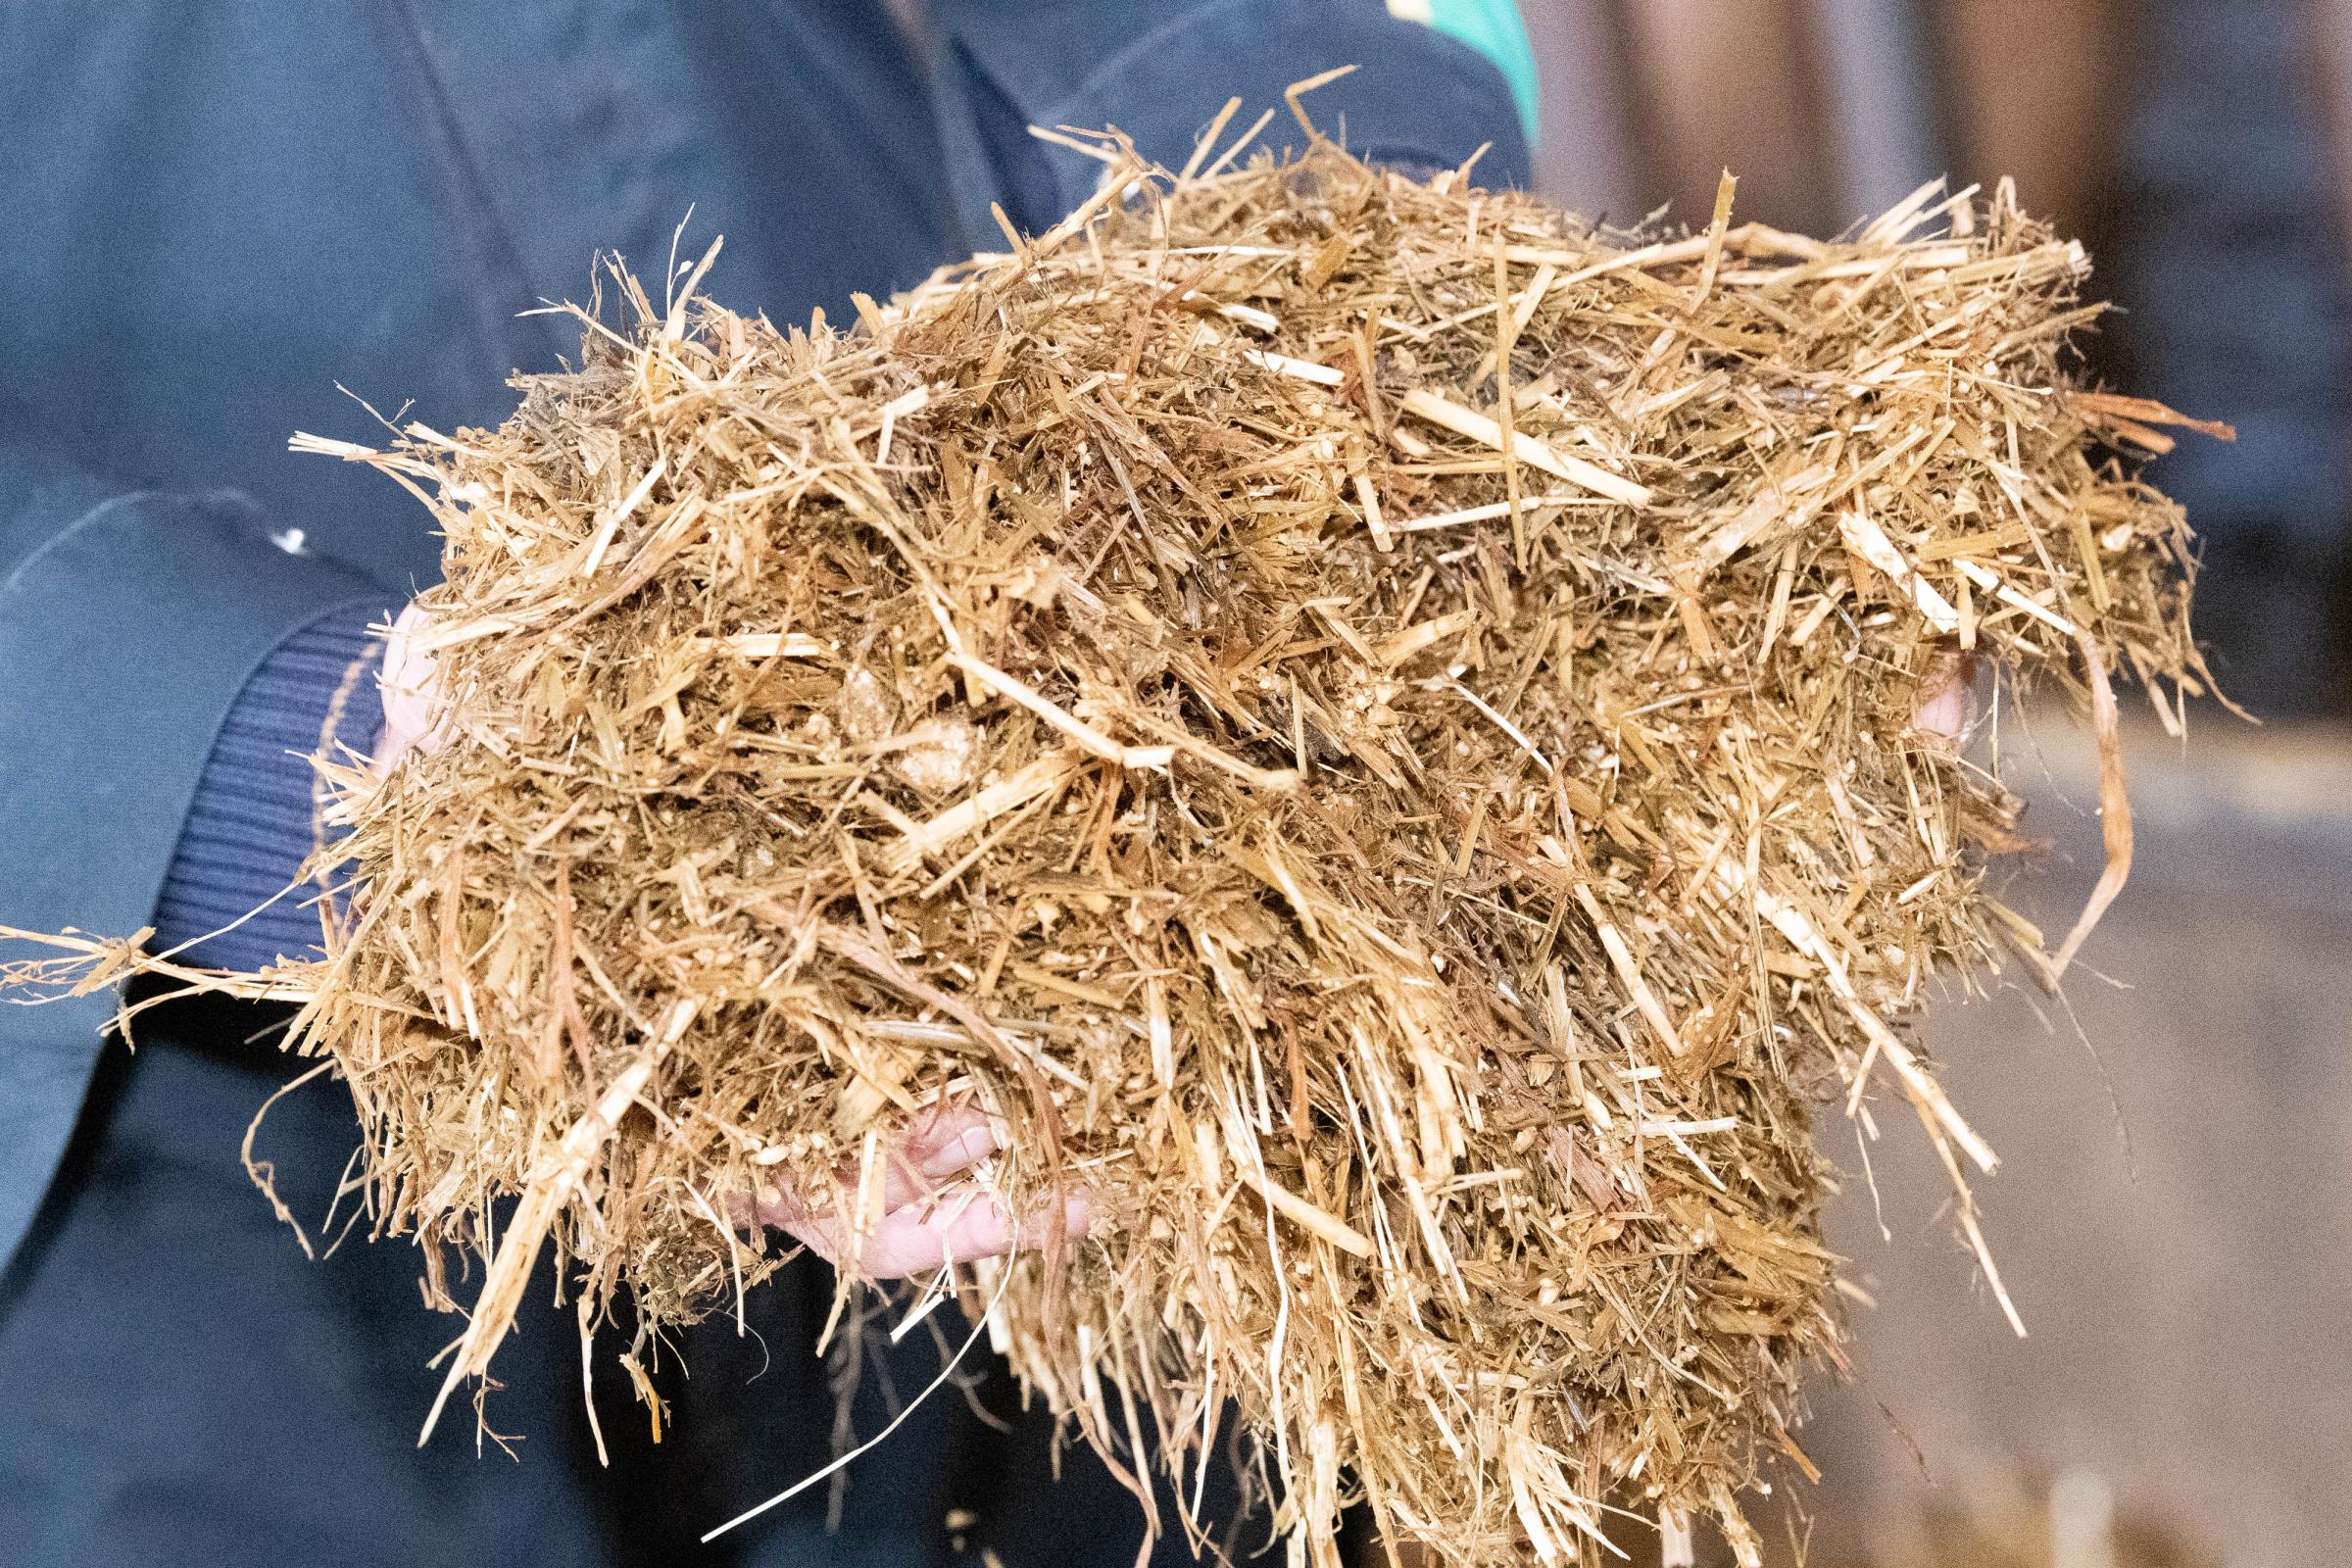 some of the silage-based diet, with barley mix, minerals, pot ale syrup and straw for roughage Ref:RH170521155 Rob Haining / The Scottish Farmer...